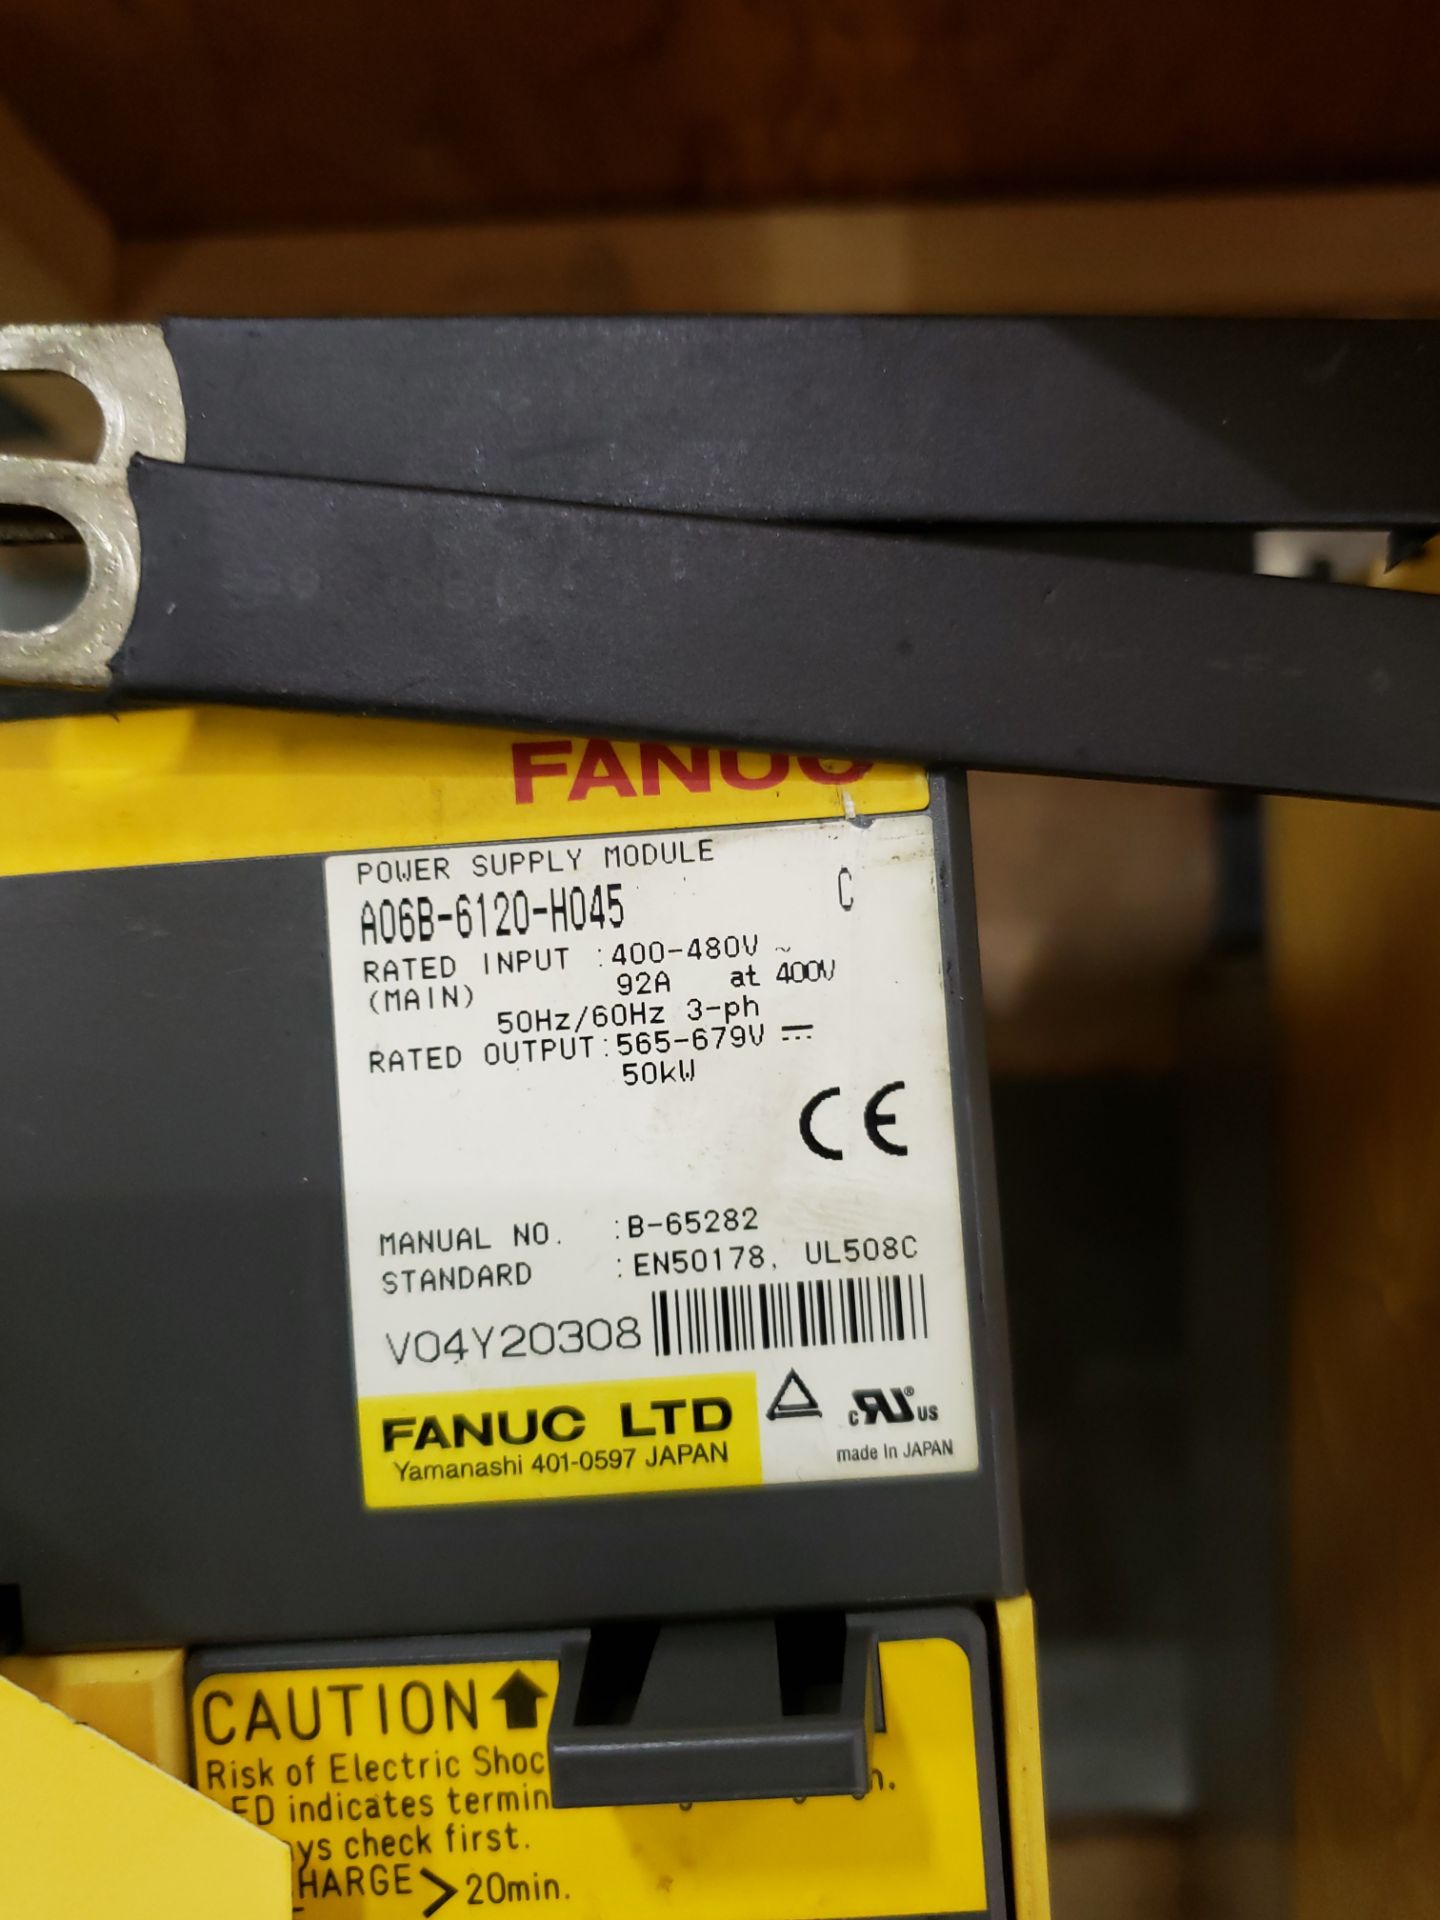 FANUC POWER SUPPLY MODULE MODEL-A06B-6120-H045 480V(LOCATED AT: 131 W. HARVEST STREET, BLUFFTON, - Image 2 of 2